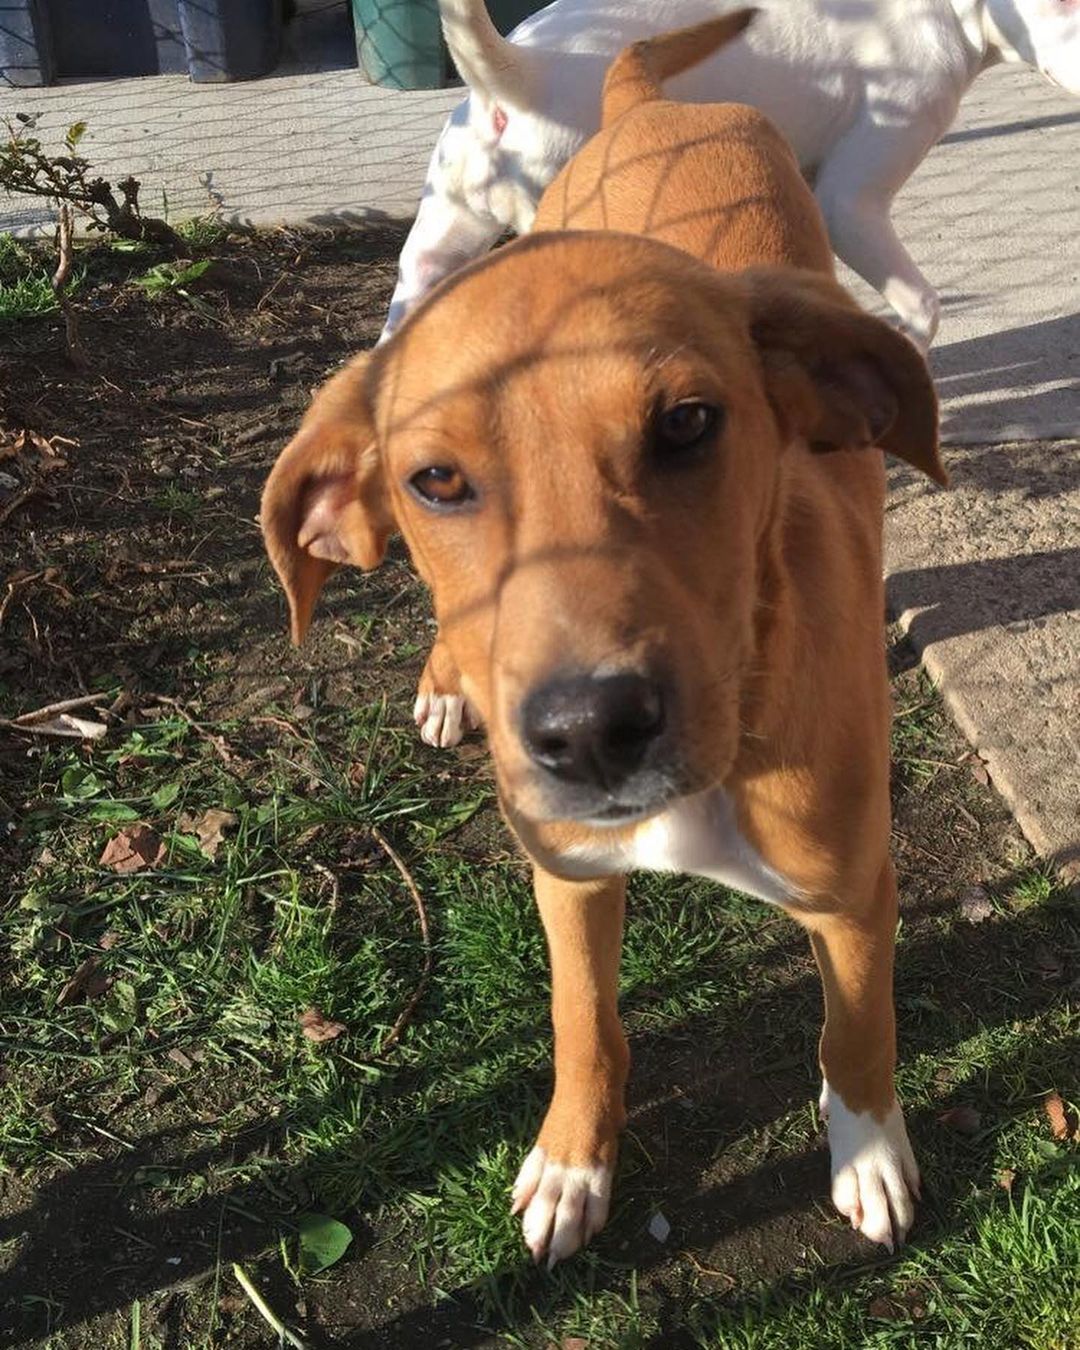 ADOPTED!!! Rusty here! Rusty is a hound mix (maybe part grey hound ) we are working on potty training and doing well such a smart boy. He is crate trained. Rusty would do best in a home with another dog. Although he loves his humans, another dog gives him a bit more confidence. He is a laid back pup who enjoys laying in his bed with a toy or out in the yard playing tug a war with his foster sister. Rusty would need a fenced yard at least 6 ft fence because he can jump high! He is extremely gentle with kids and does well with little ones currently home with a 3yr old & 8 yr old. Not sure about cats yet!